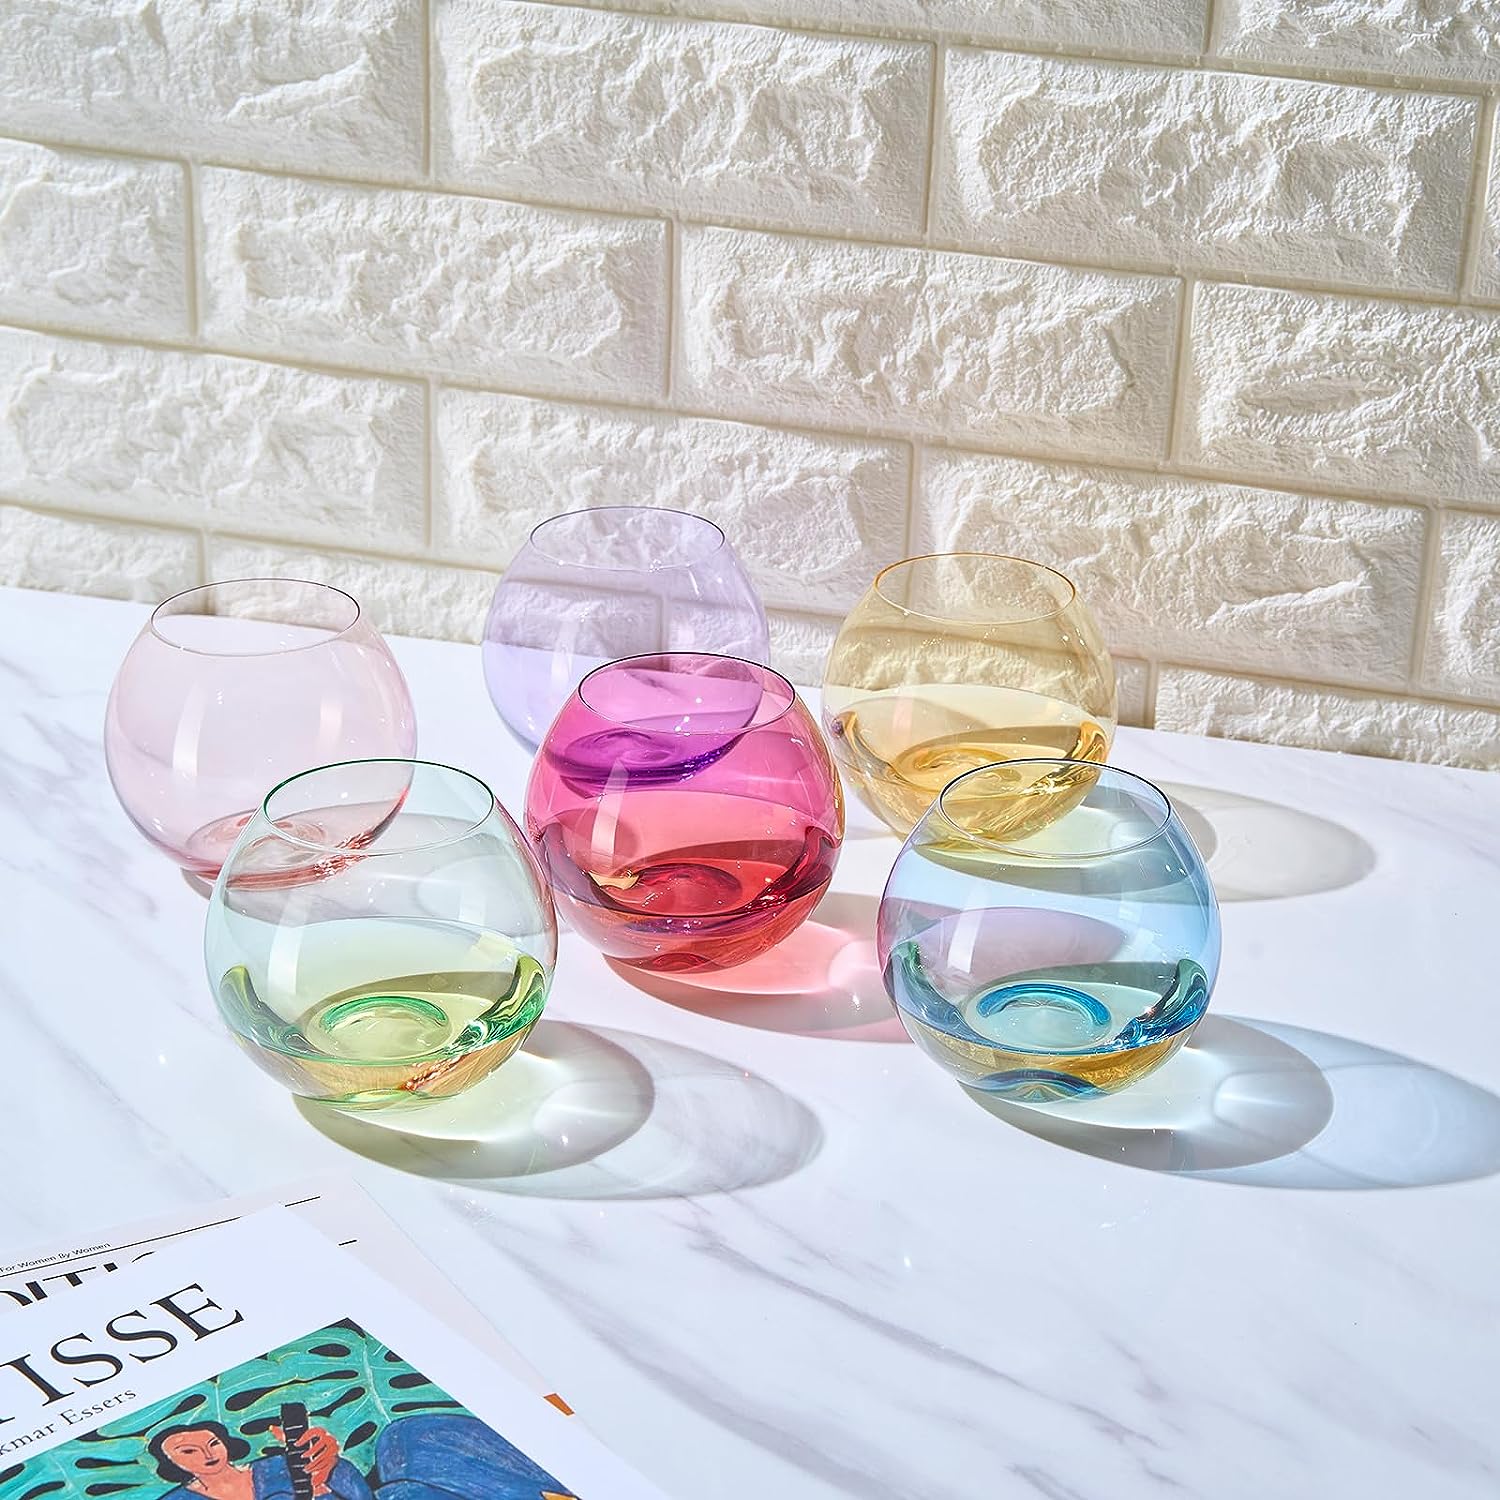 Colored Stemless Wine Glass Set of 6, Vibrant Splash Wine Glasses with  Colored Bottom for Women Men …See more Colored Stemless Wine Glass Set of  6